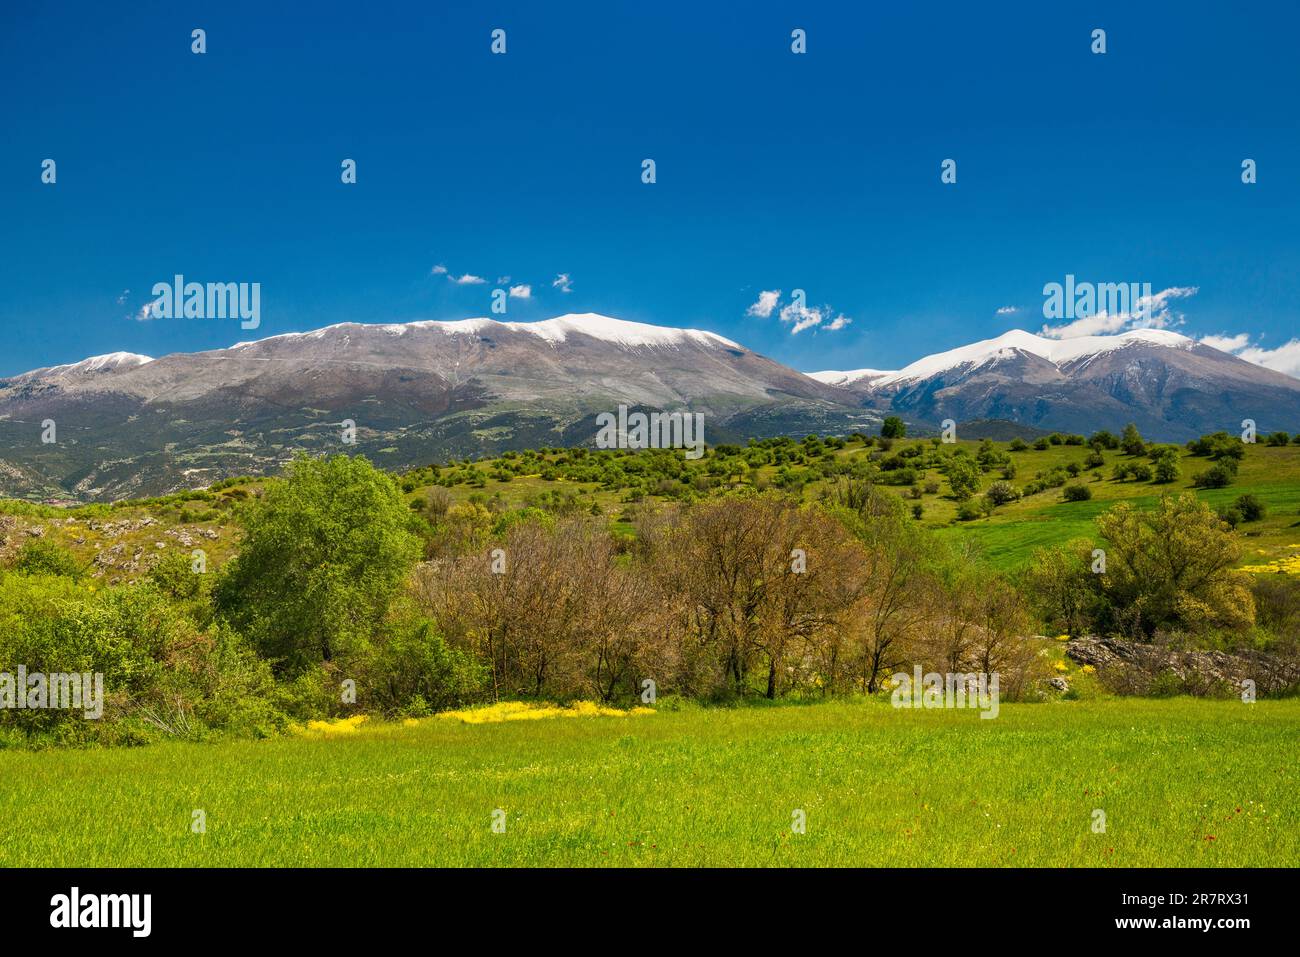 Mount Olympus massif, early spring freshness, view from SW, near village of Kallithea, Thessaly region, Greece Stock Photo